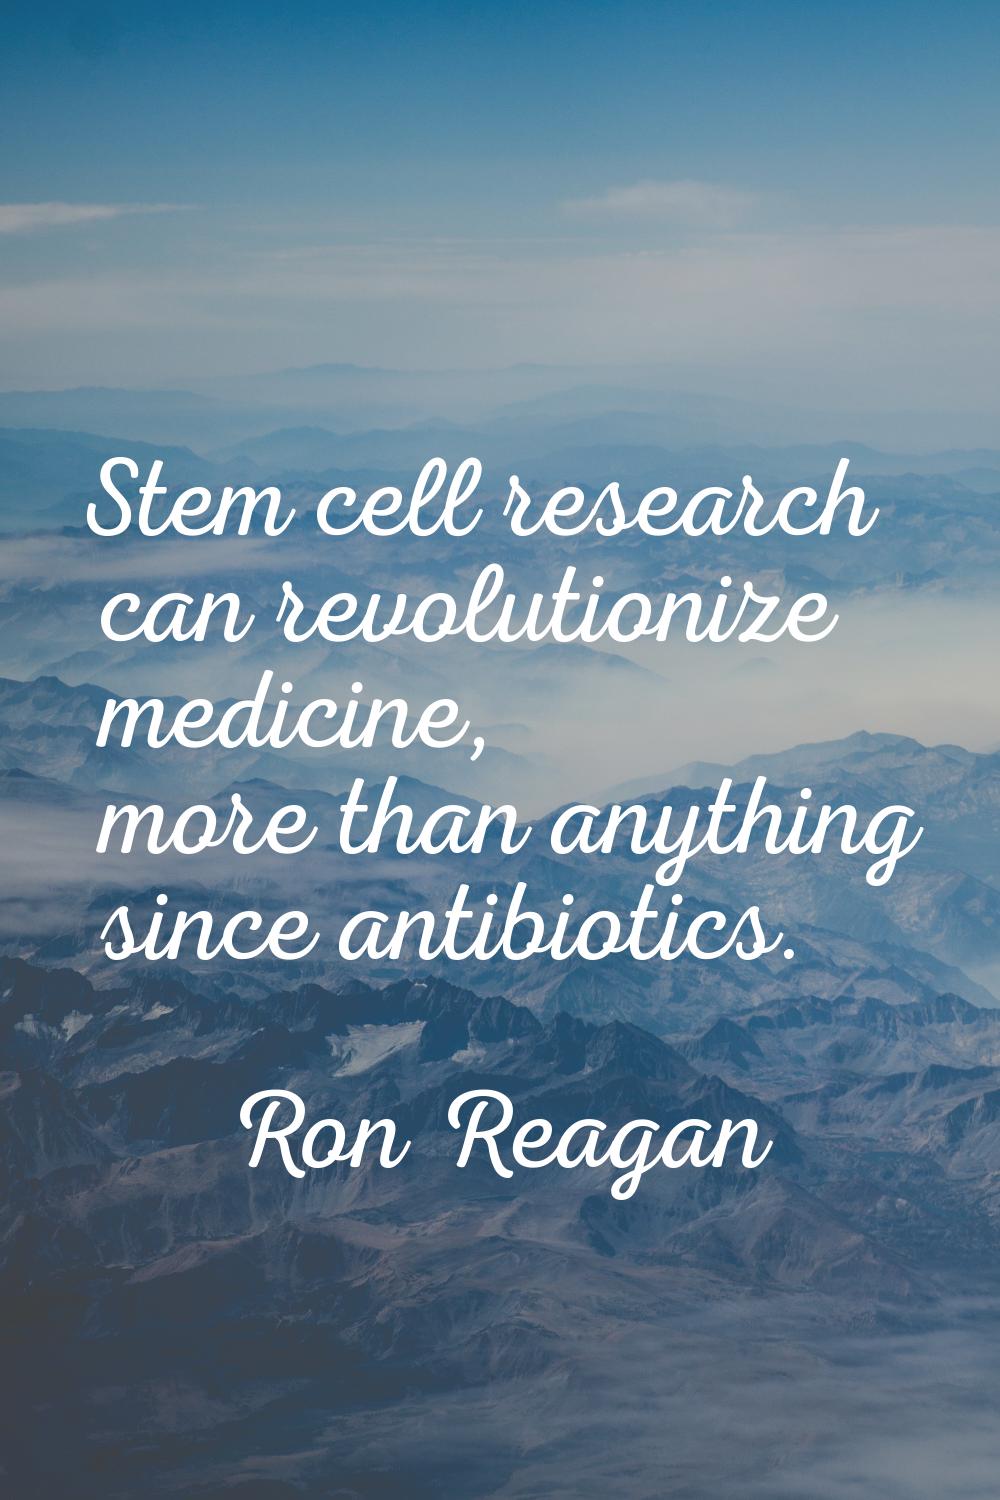 Stem cell research can revolutionize medicine, more than anything since antibiotics.